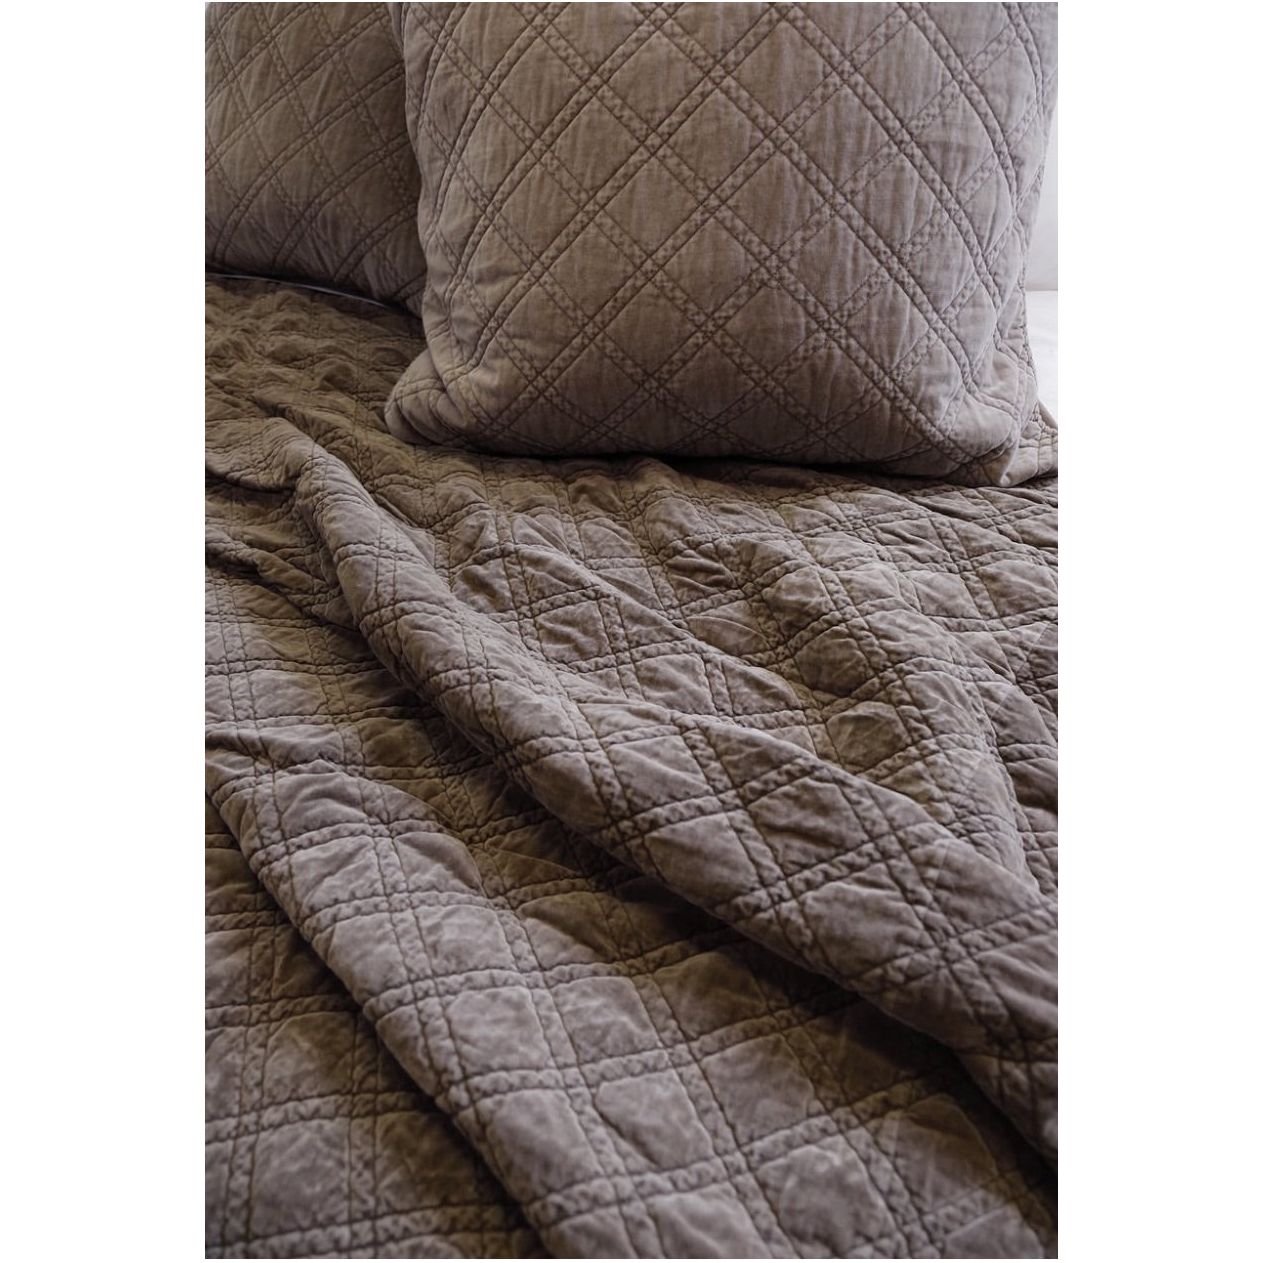 Brussels Coverlet Bedding Pewter - Amethyst HomeThe Brussels Coverlet Bedding Pewter by Pom Pom at Home is a grand and sophisticated line that has a diamond quilted pattern on the front, made of 100% stone washed cotton velvet. Available in several soft, stone washed colors.  100% cotton velvet Machine wash cold; tumble dry low; warm iron as needed Do not bleach